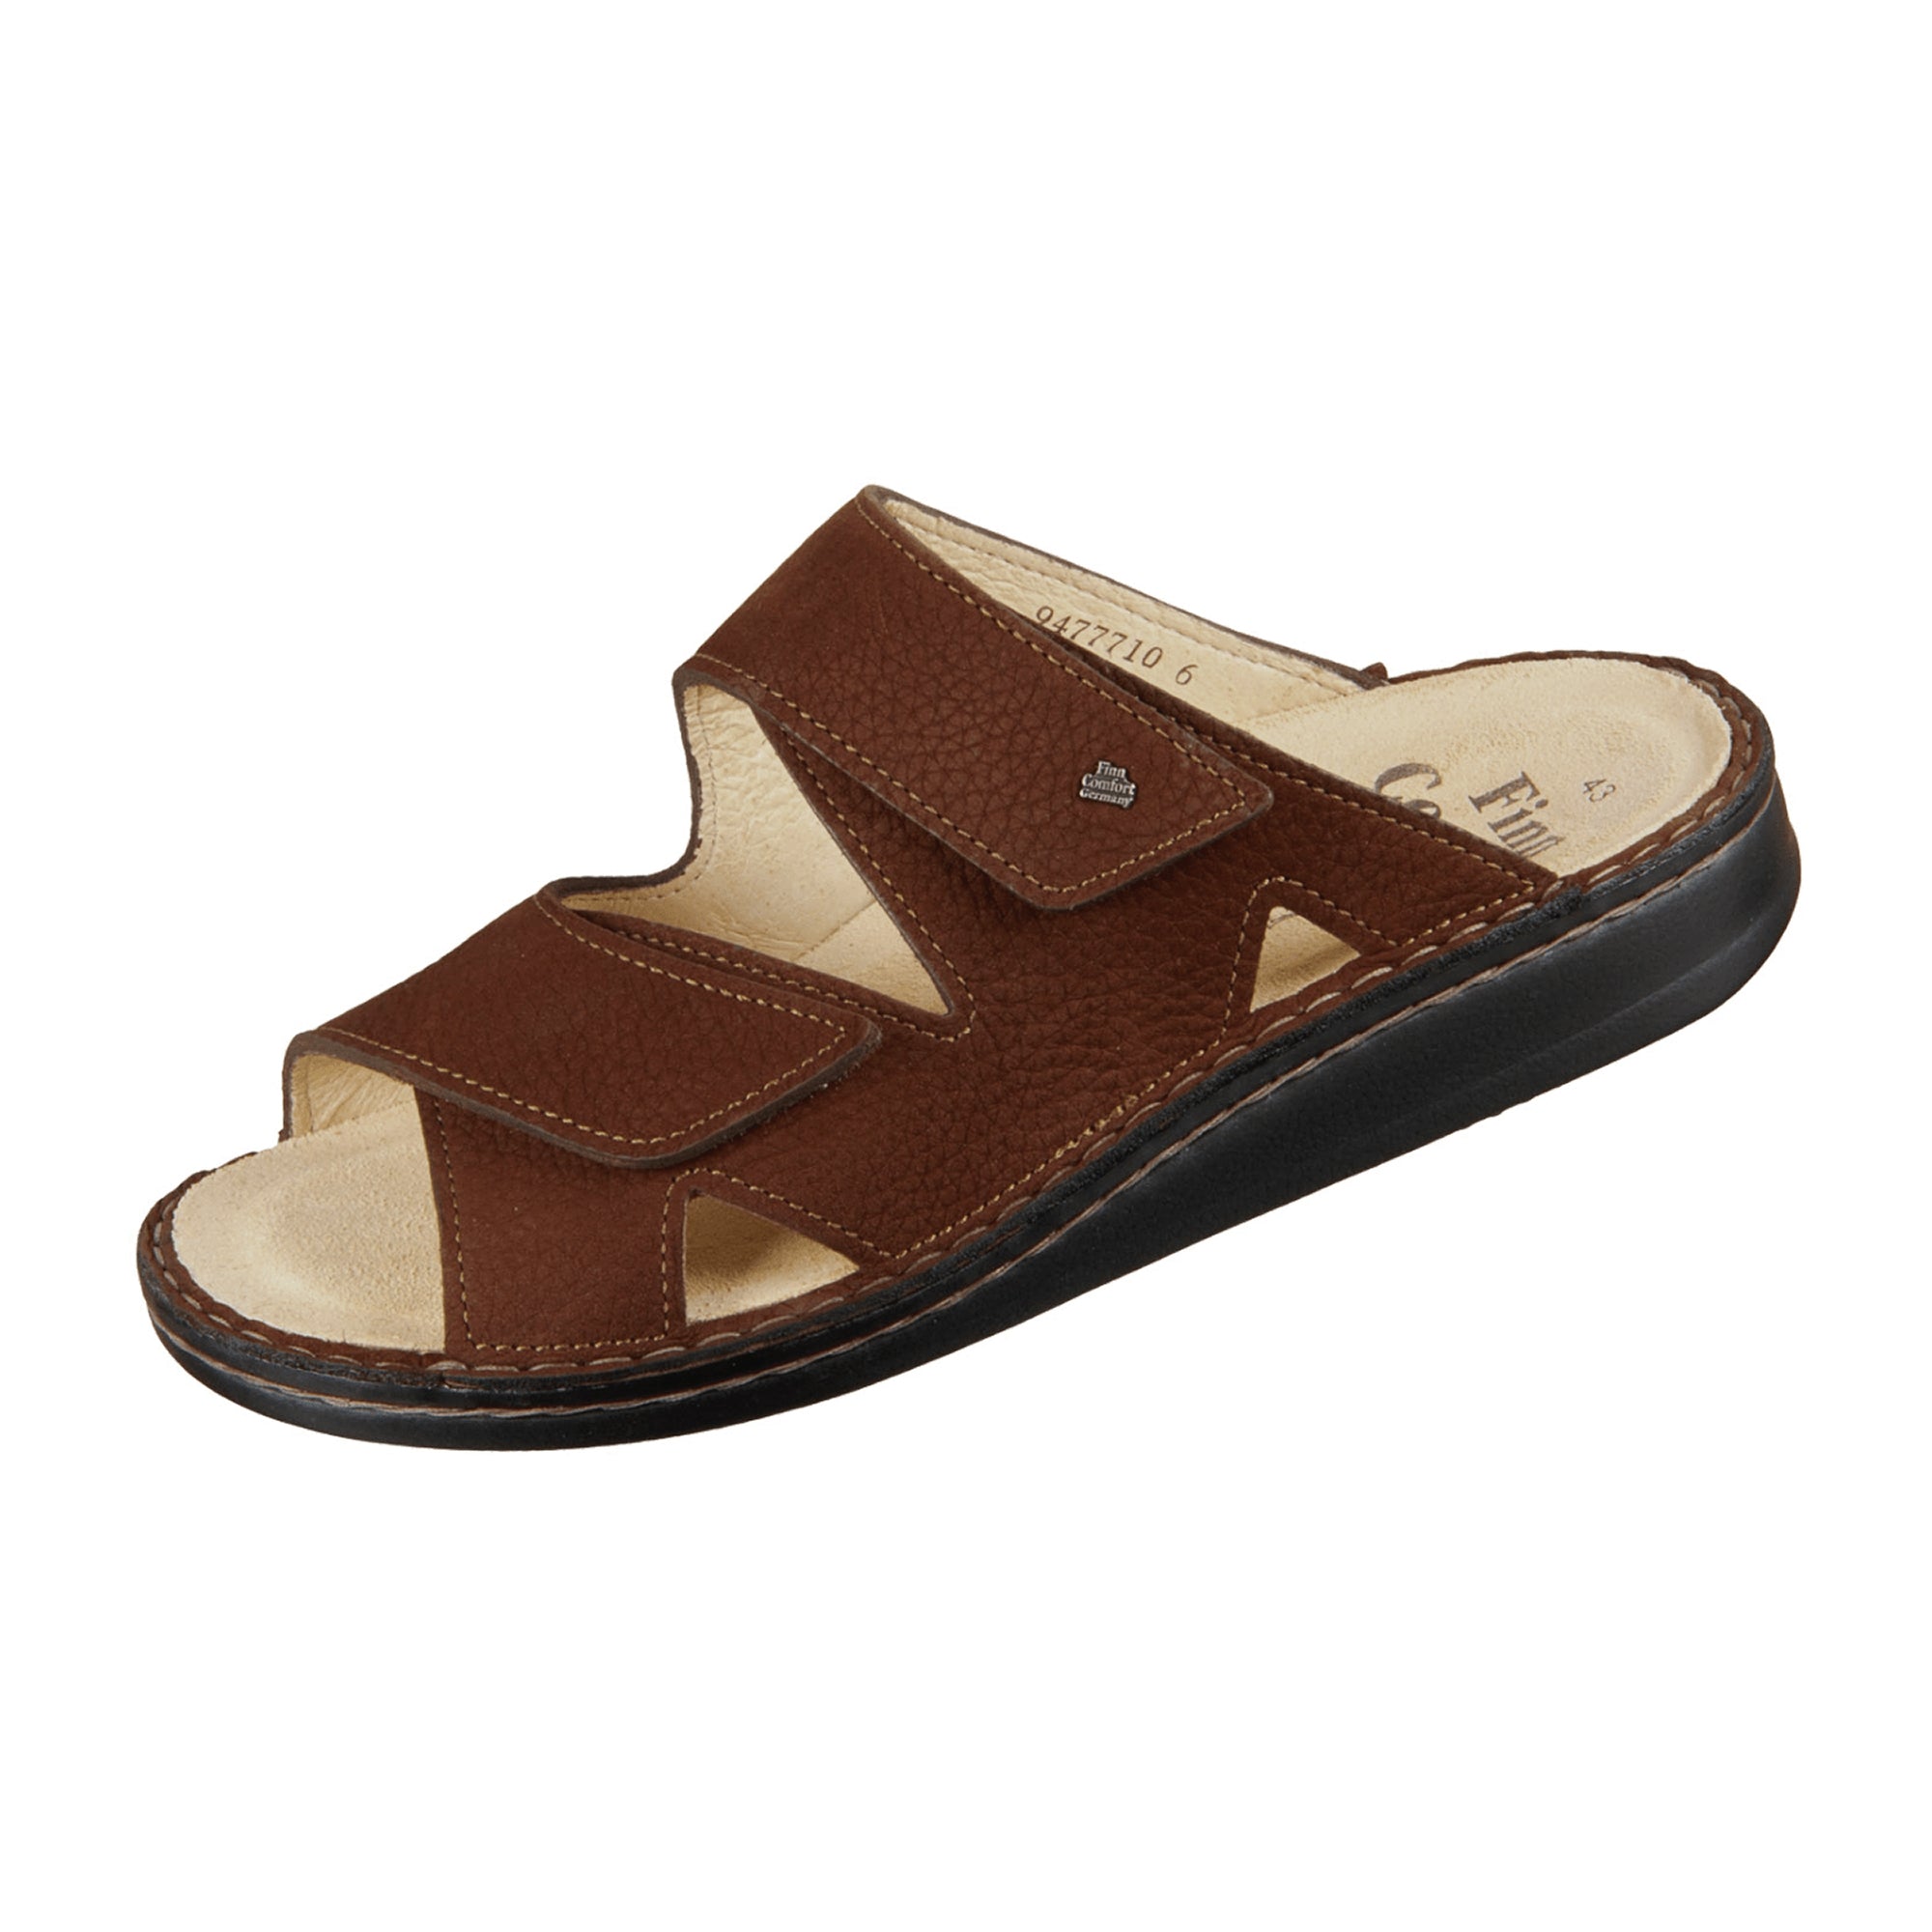 Finn Comfort Danzig-Soft Men's Sandals - Chocolate Brown, Comfort Leather Slides with Orthopedic Support